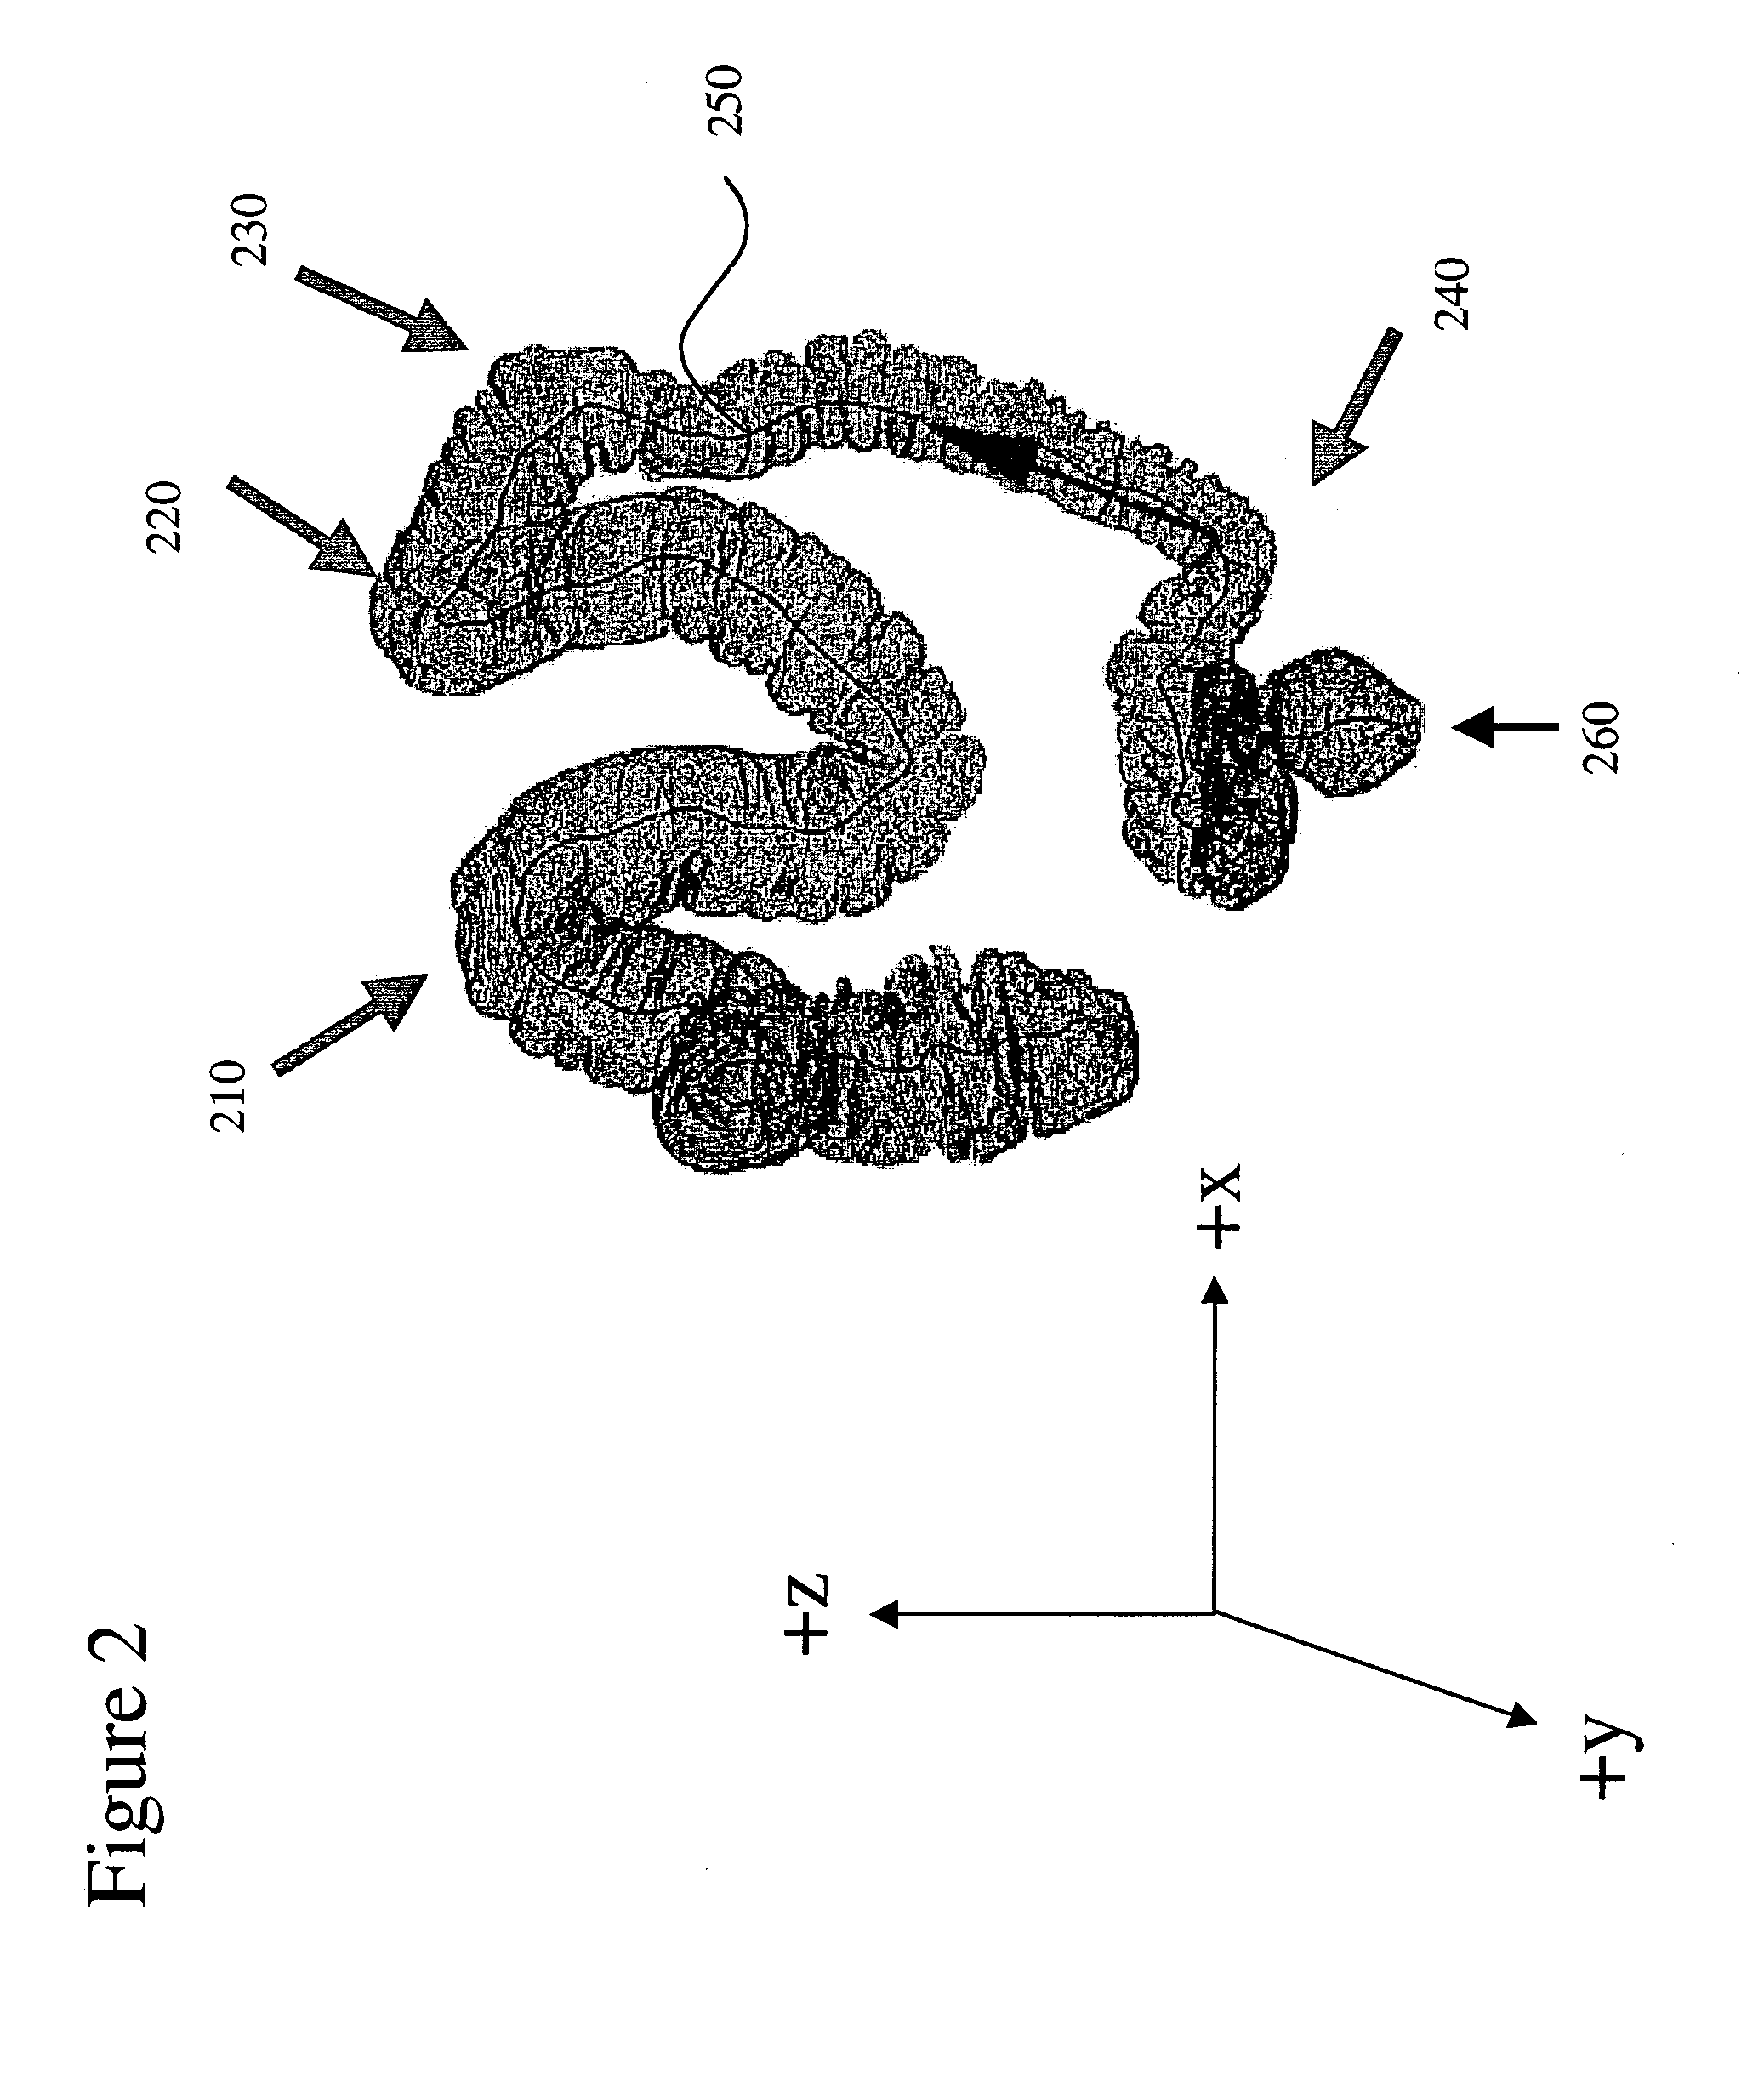 Method for matching and registering medical image data